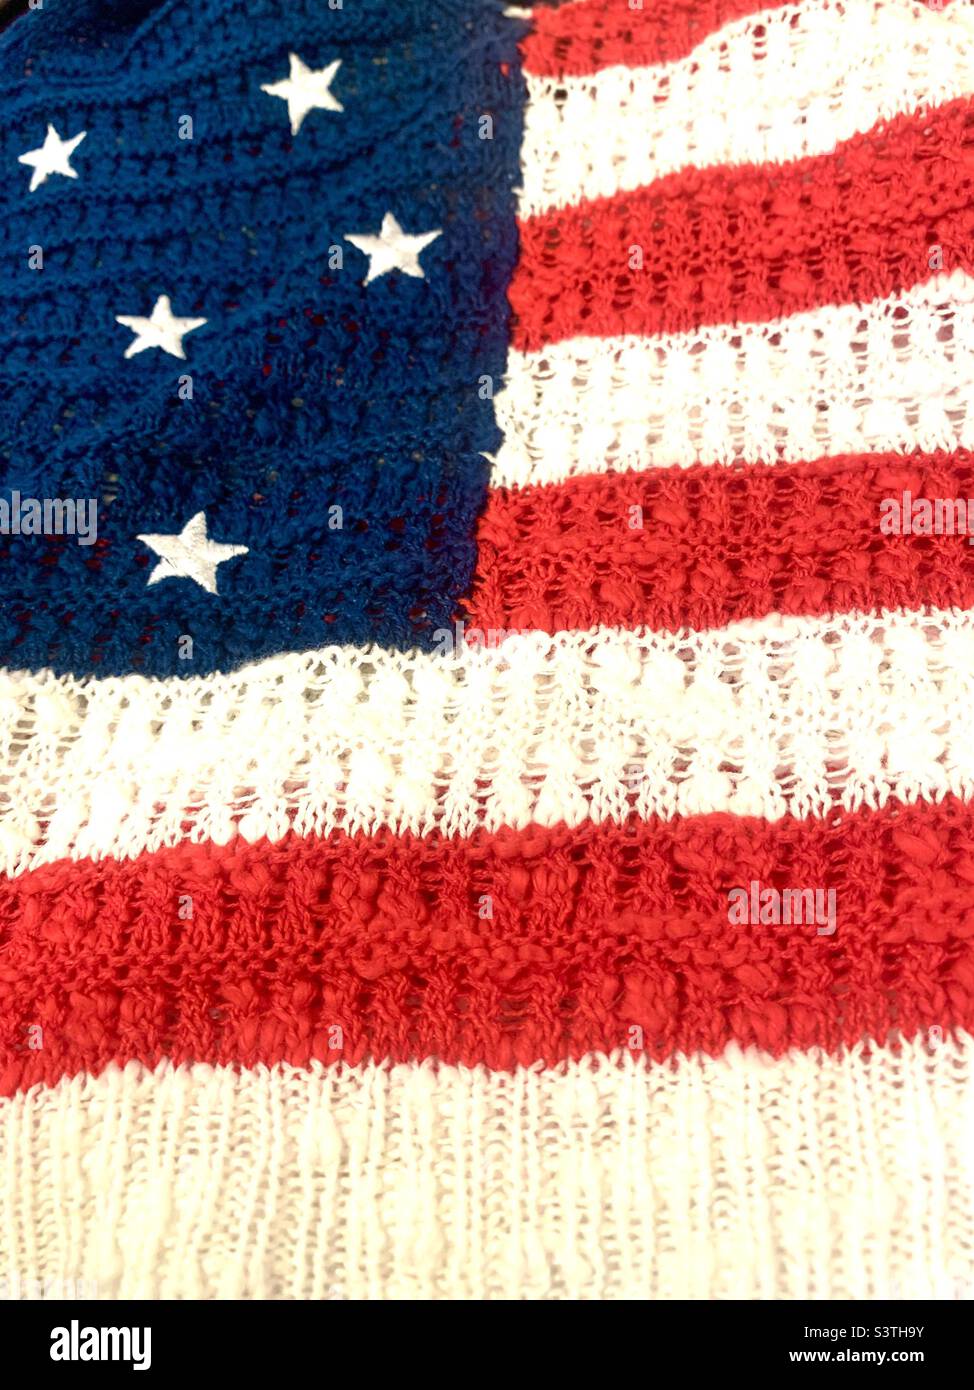 4th of July American flag sweater textured fabric Stock Photo